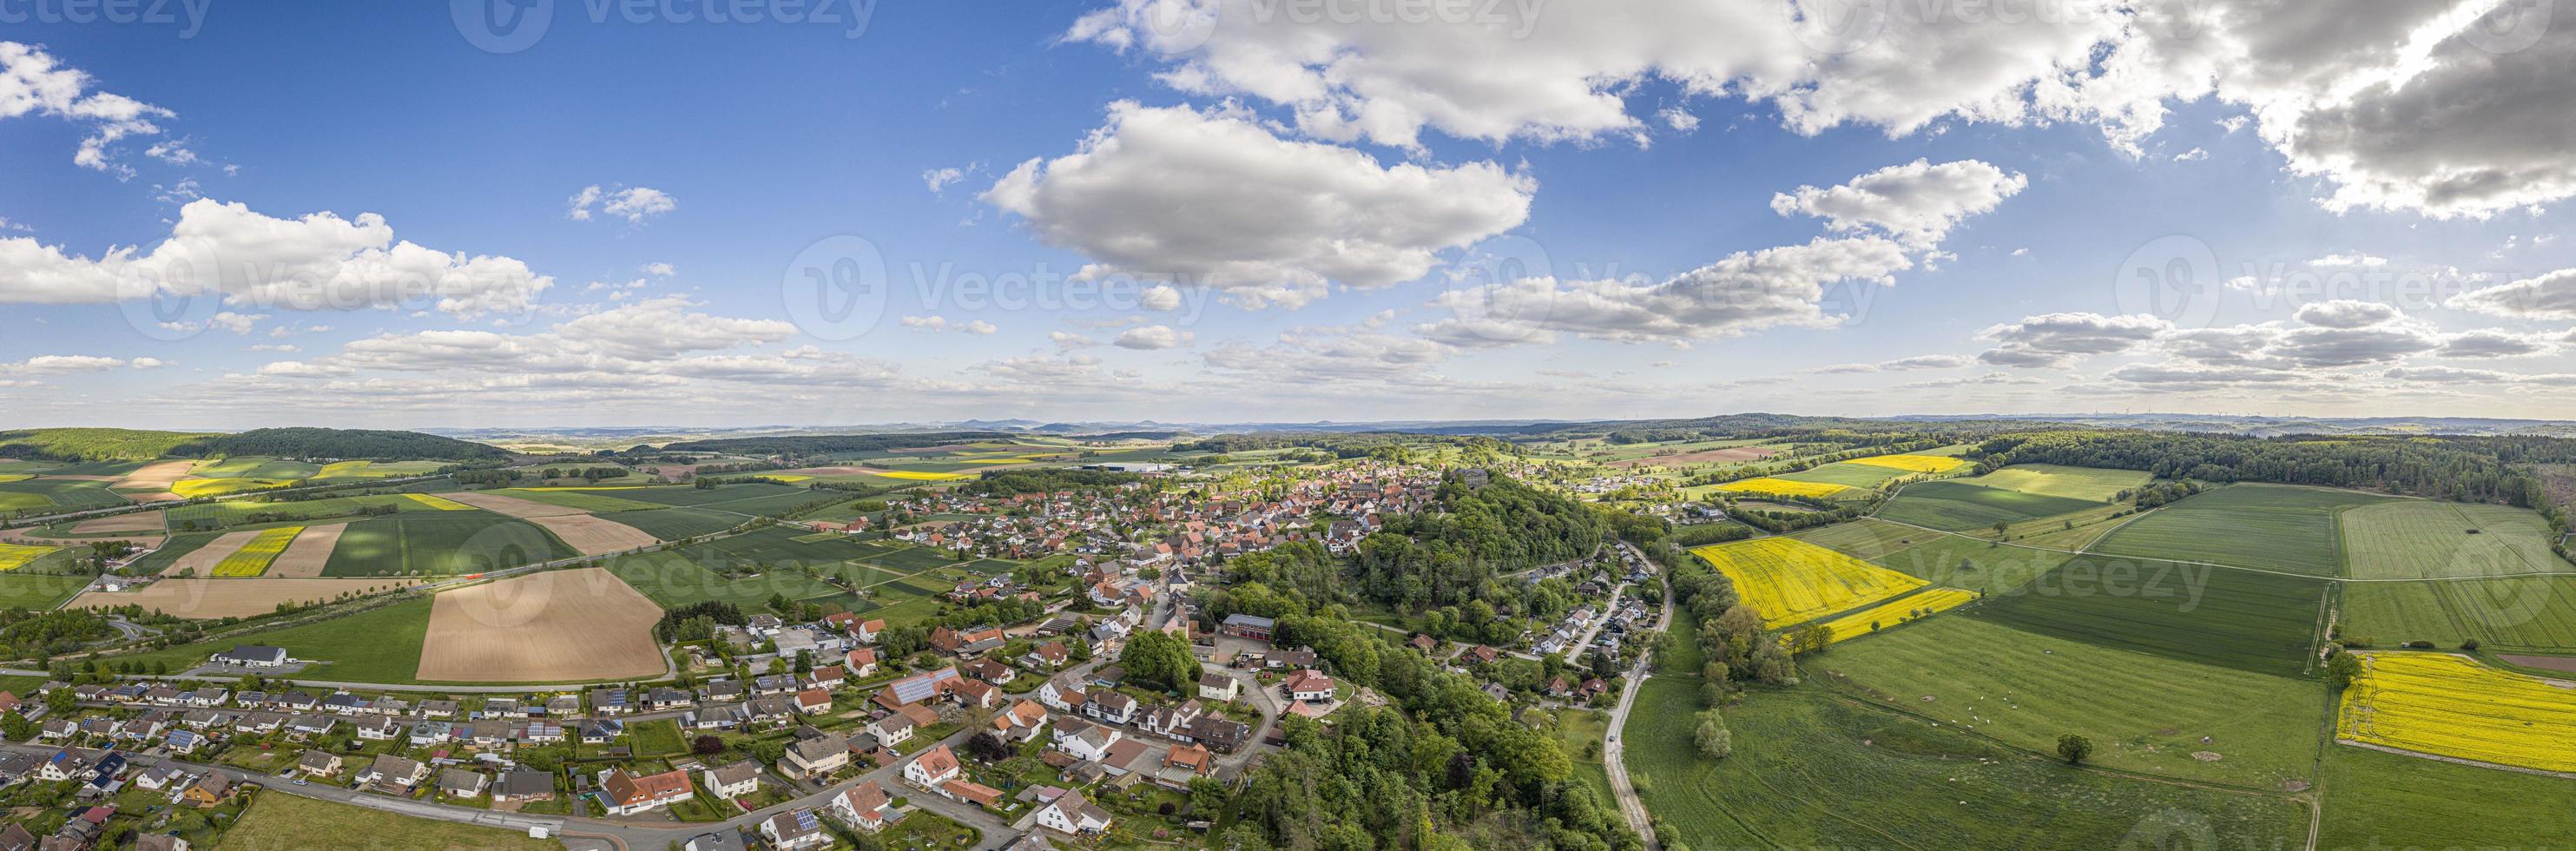 Panoramic drone picture of the town Diemelstadt in northern Hesse in Germany during daytime photo